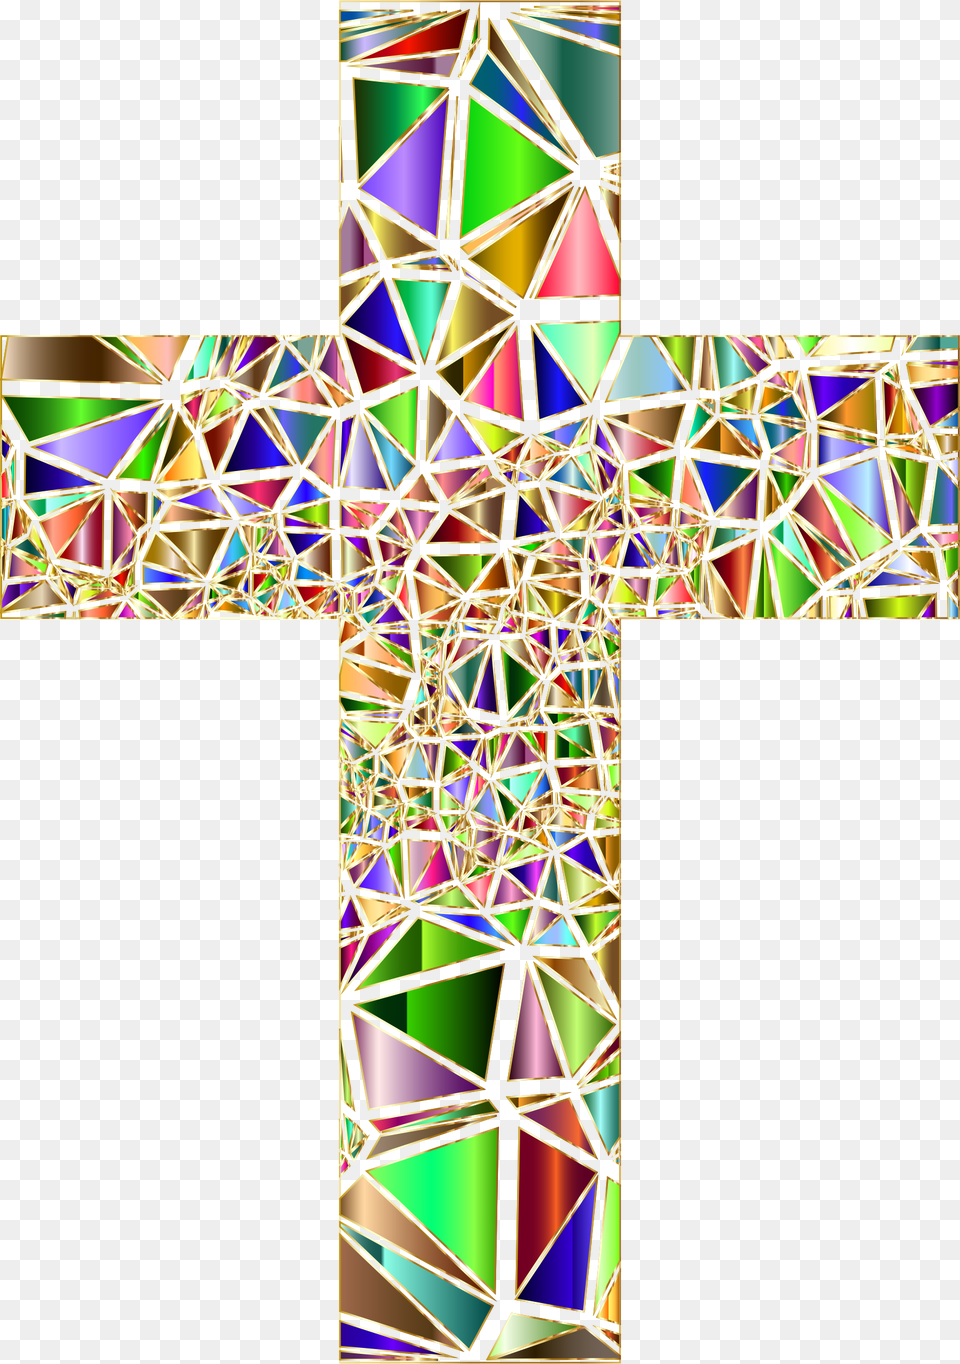 This Icons Design Of Low Poly Stained Glass, Art, Cross, Symbol, Stained Glass Free Png Download